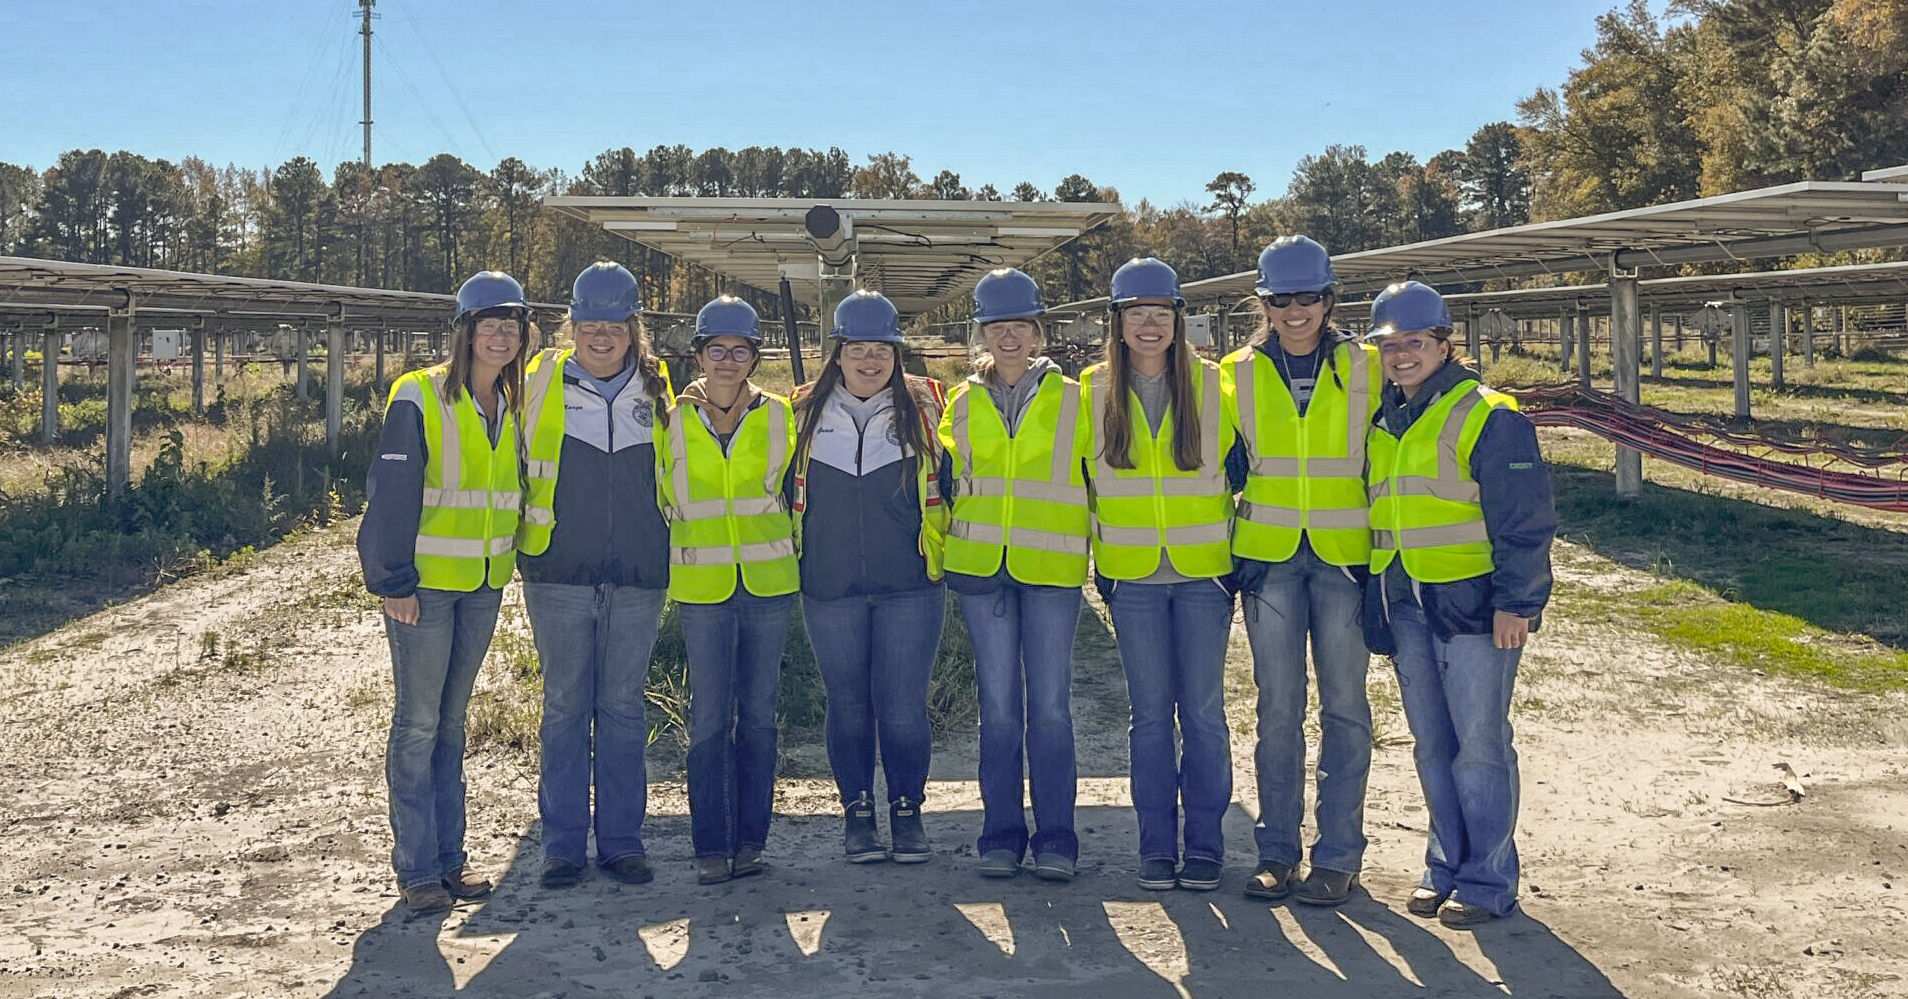 Eight female high school students wear hard hats and safety vests while smiling at the camera at a solar development site